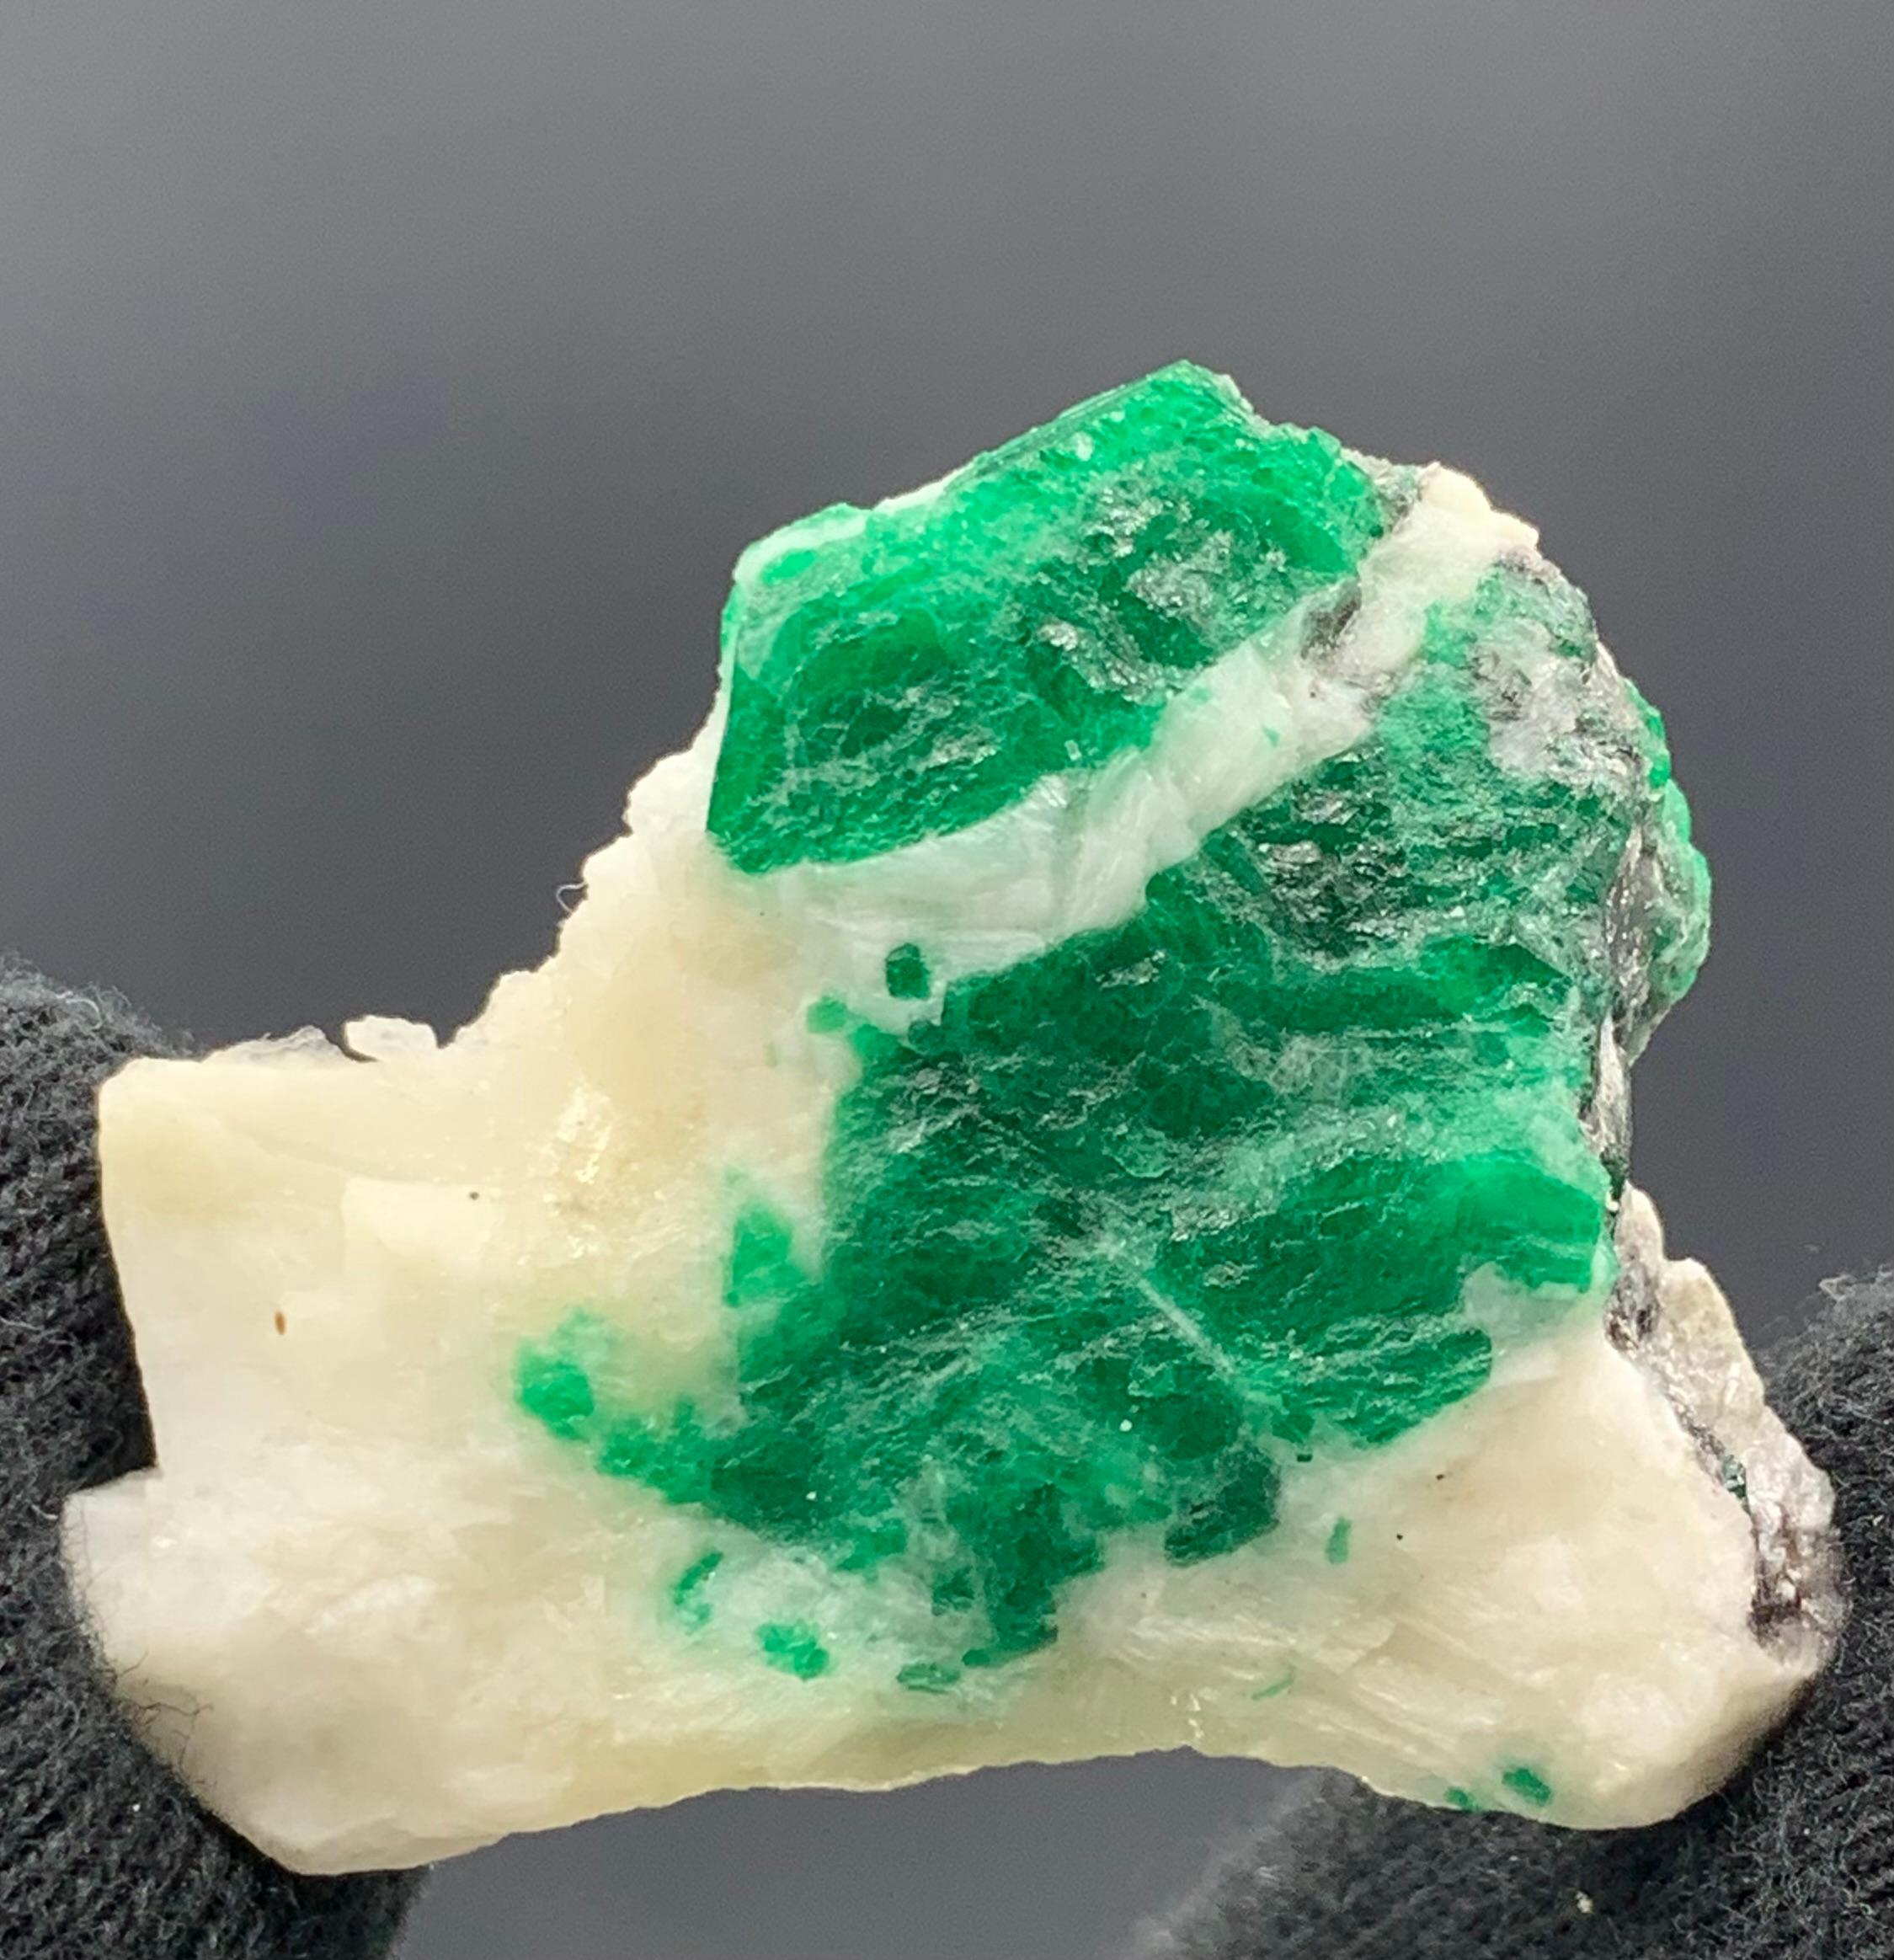 13.83 Gram Pretty Emerald Specimen From Swat Valley, Pakistan 

Weight: 13.83 Gram 
Dimension: 3.1 x 3.7 x 1 Cm 
Origin: Swat Valley, Pakistan 

Emerald has the chemical composition Be3Al2(SiO3)6 and is classified as a cyclosilicate. It has a